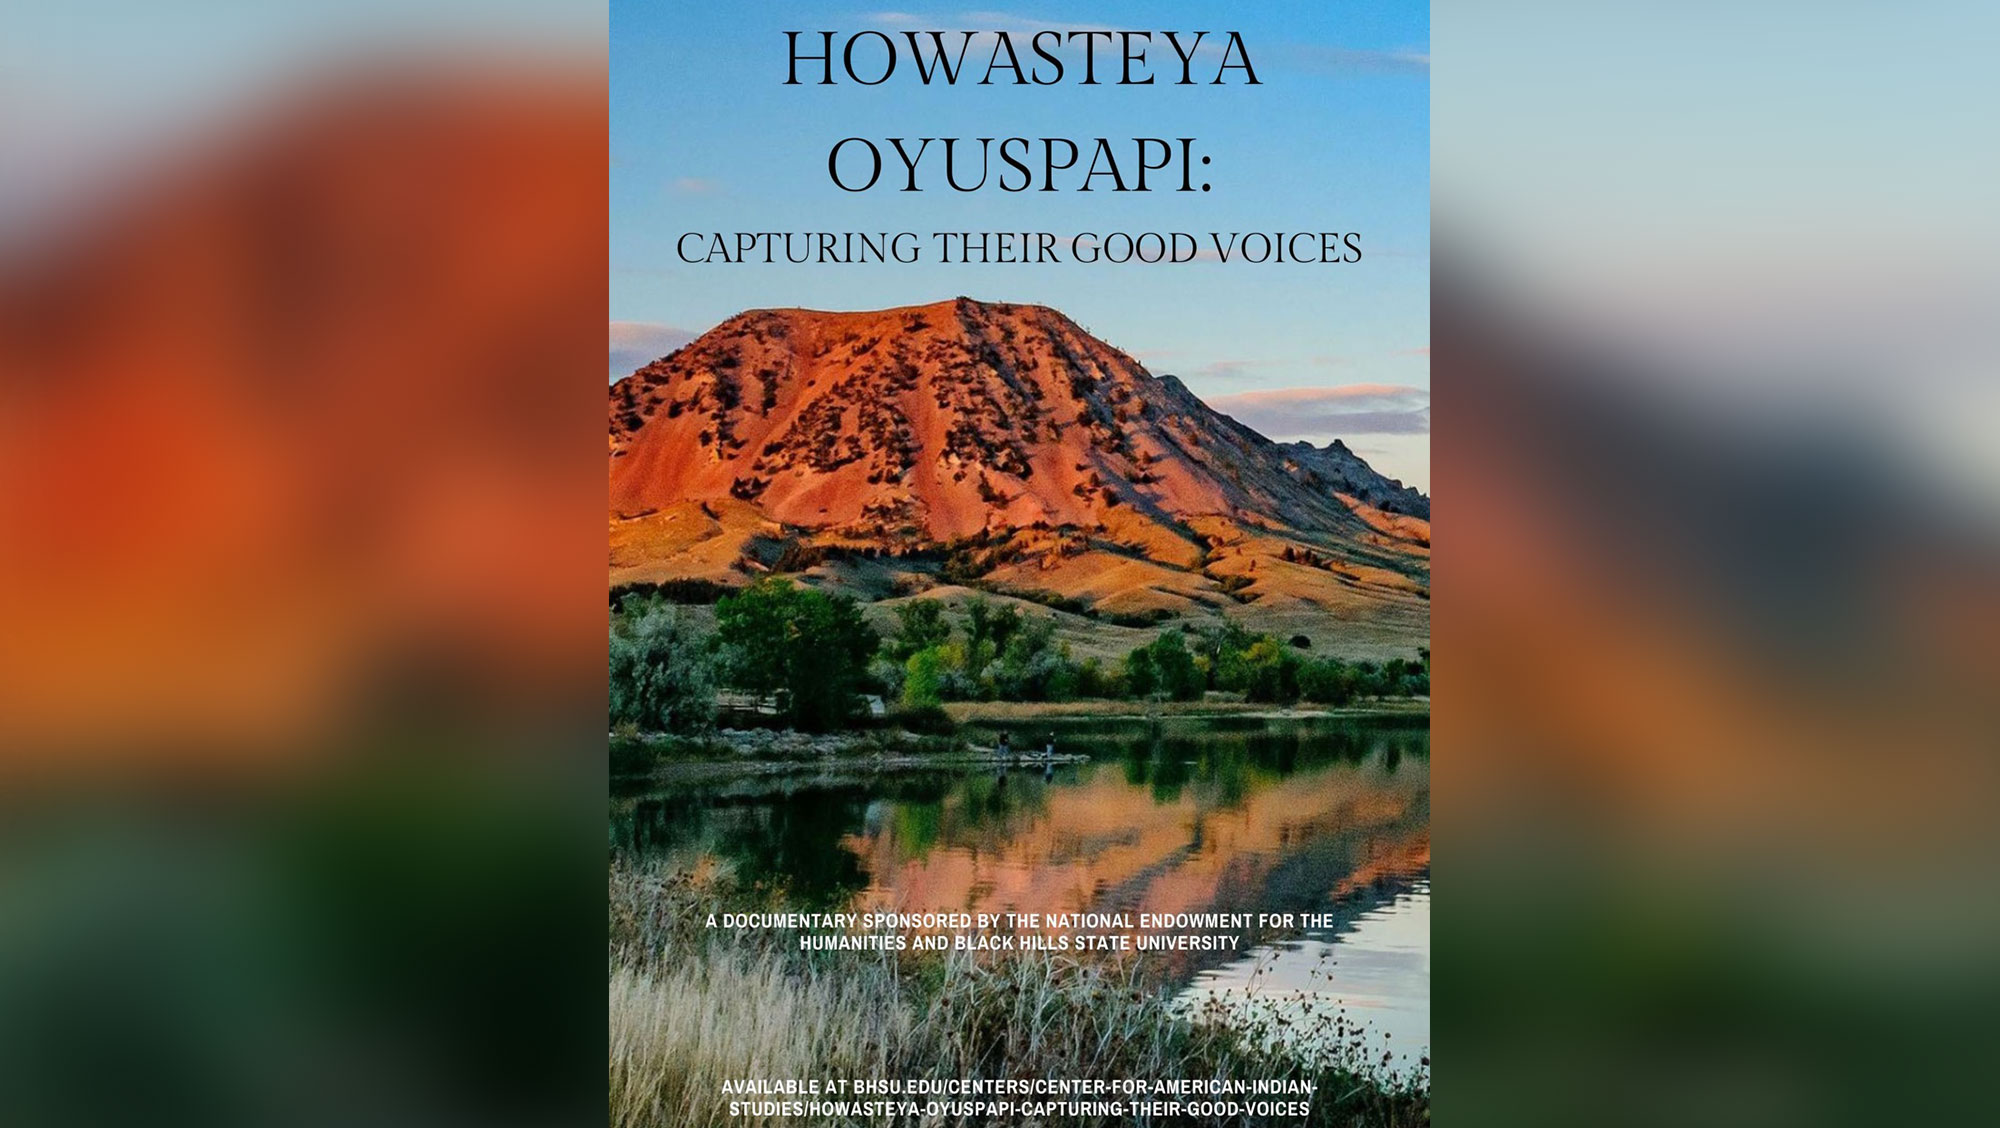 Image of the poster for Howasteya Oyuspapi: Capturing Their Good Voices.